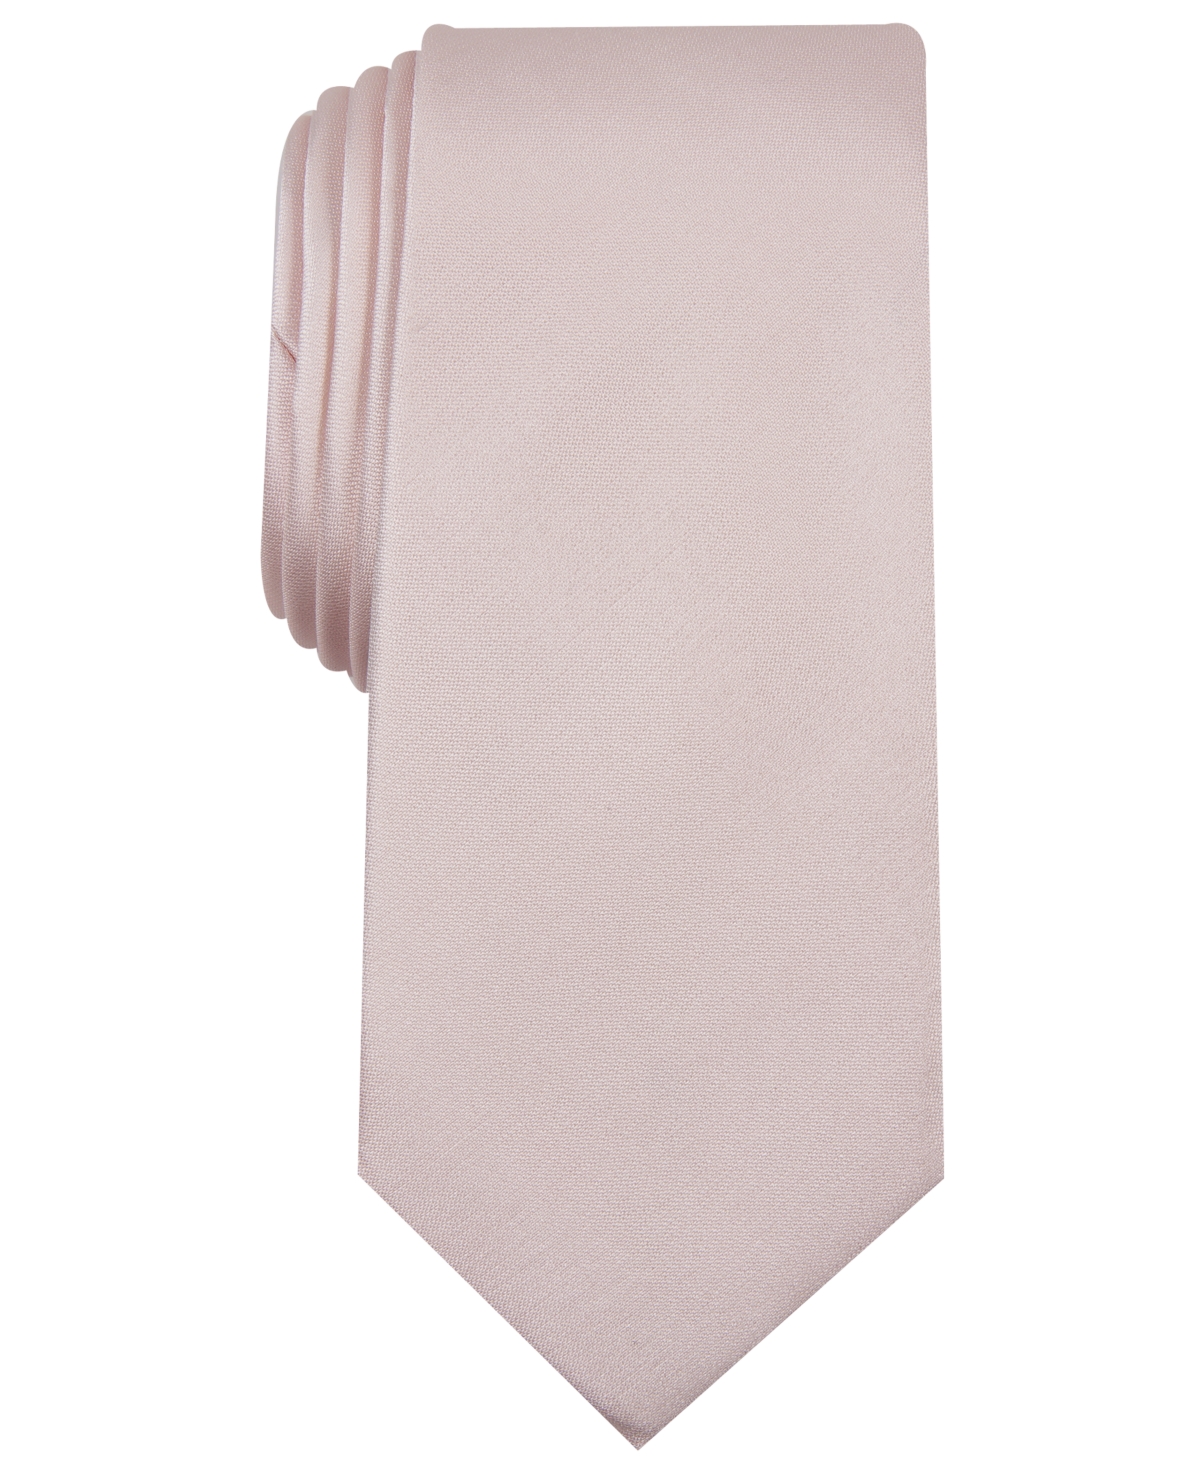 Men's Solid Texture Slim Tie, Created for Macy's - White